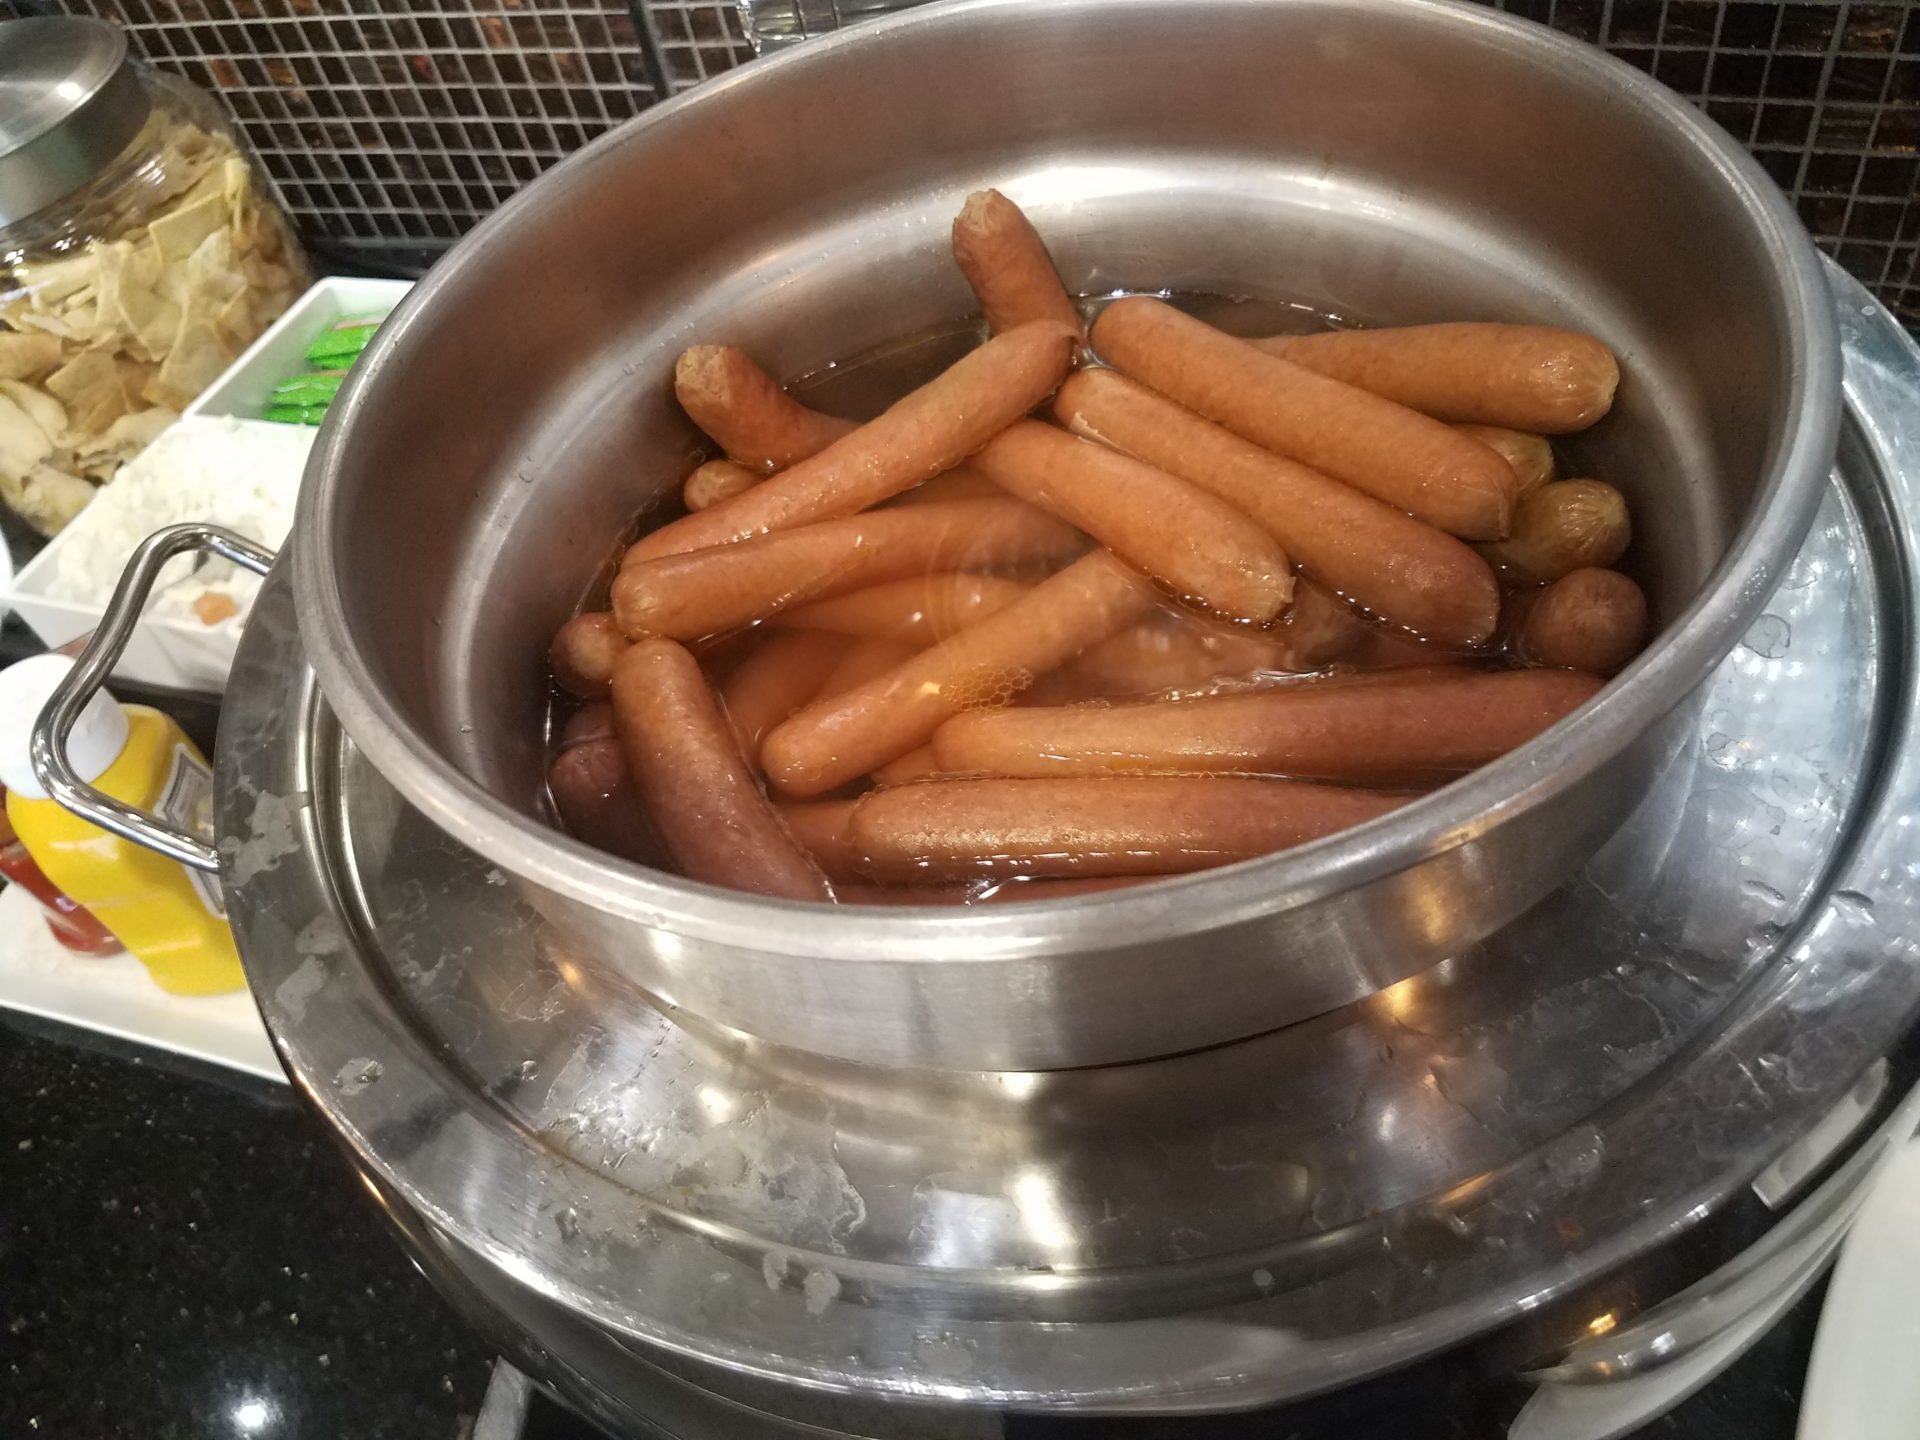 a pot of hot dogs